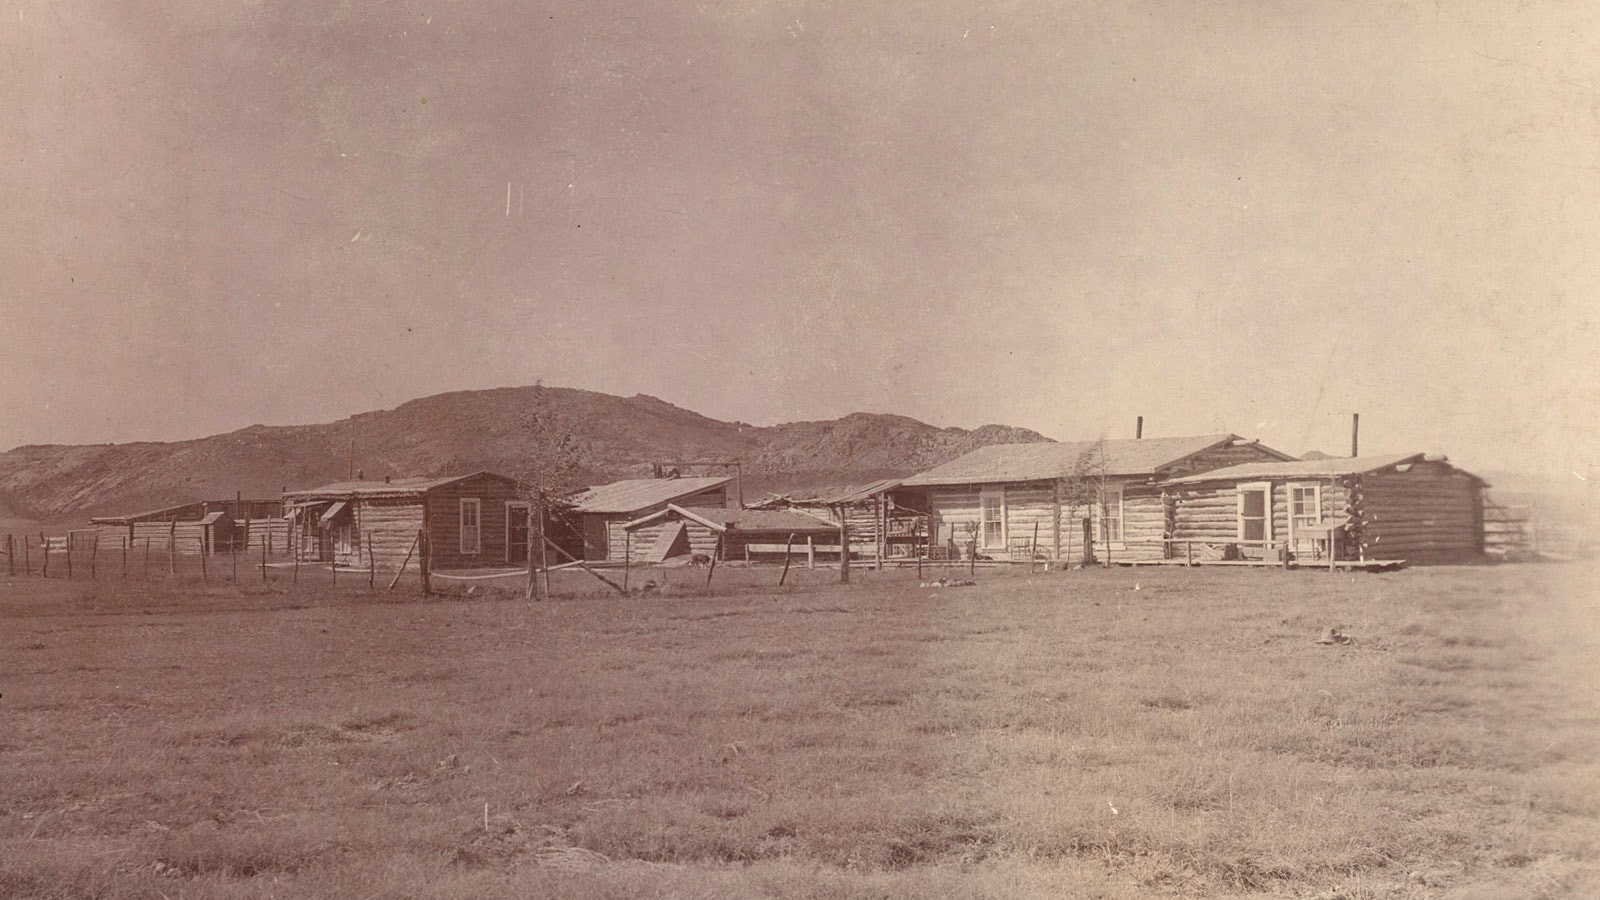 A photo of the Bothwell Ranch where Albert Bothwell ruled during his time in Wyoming.